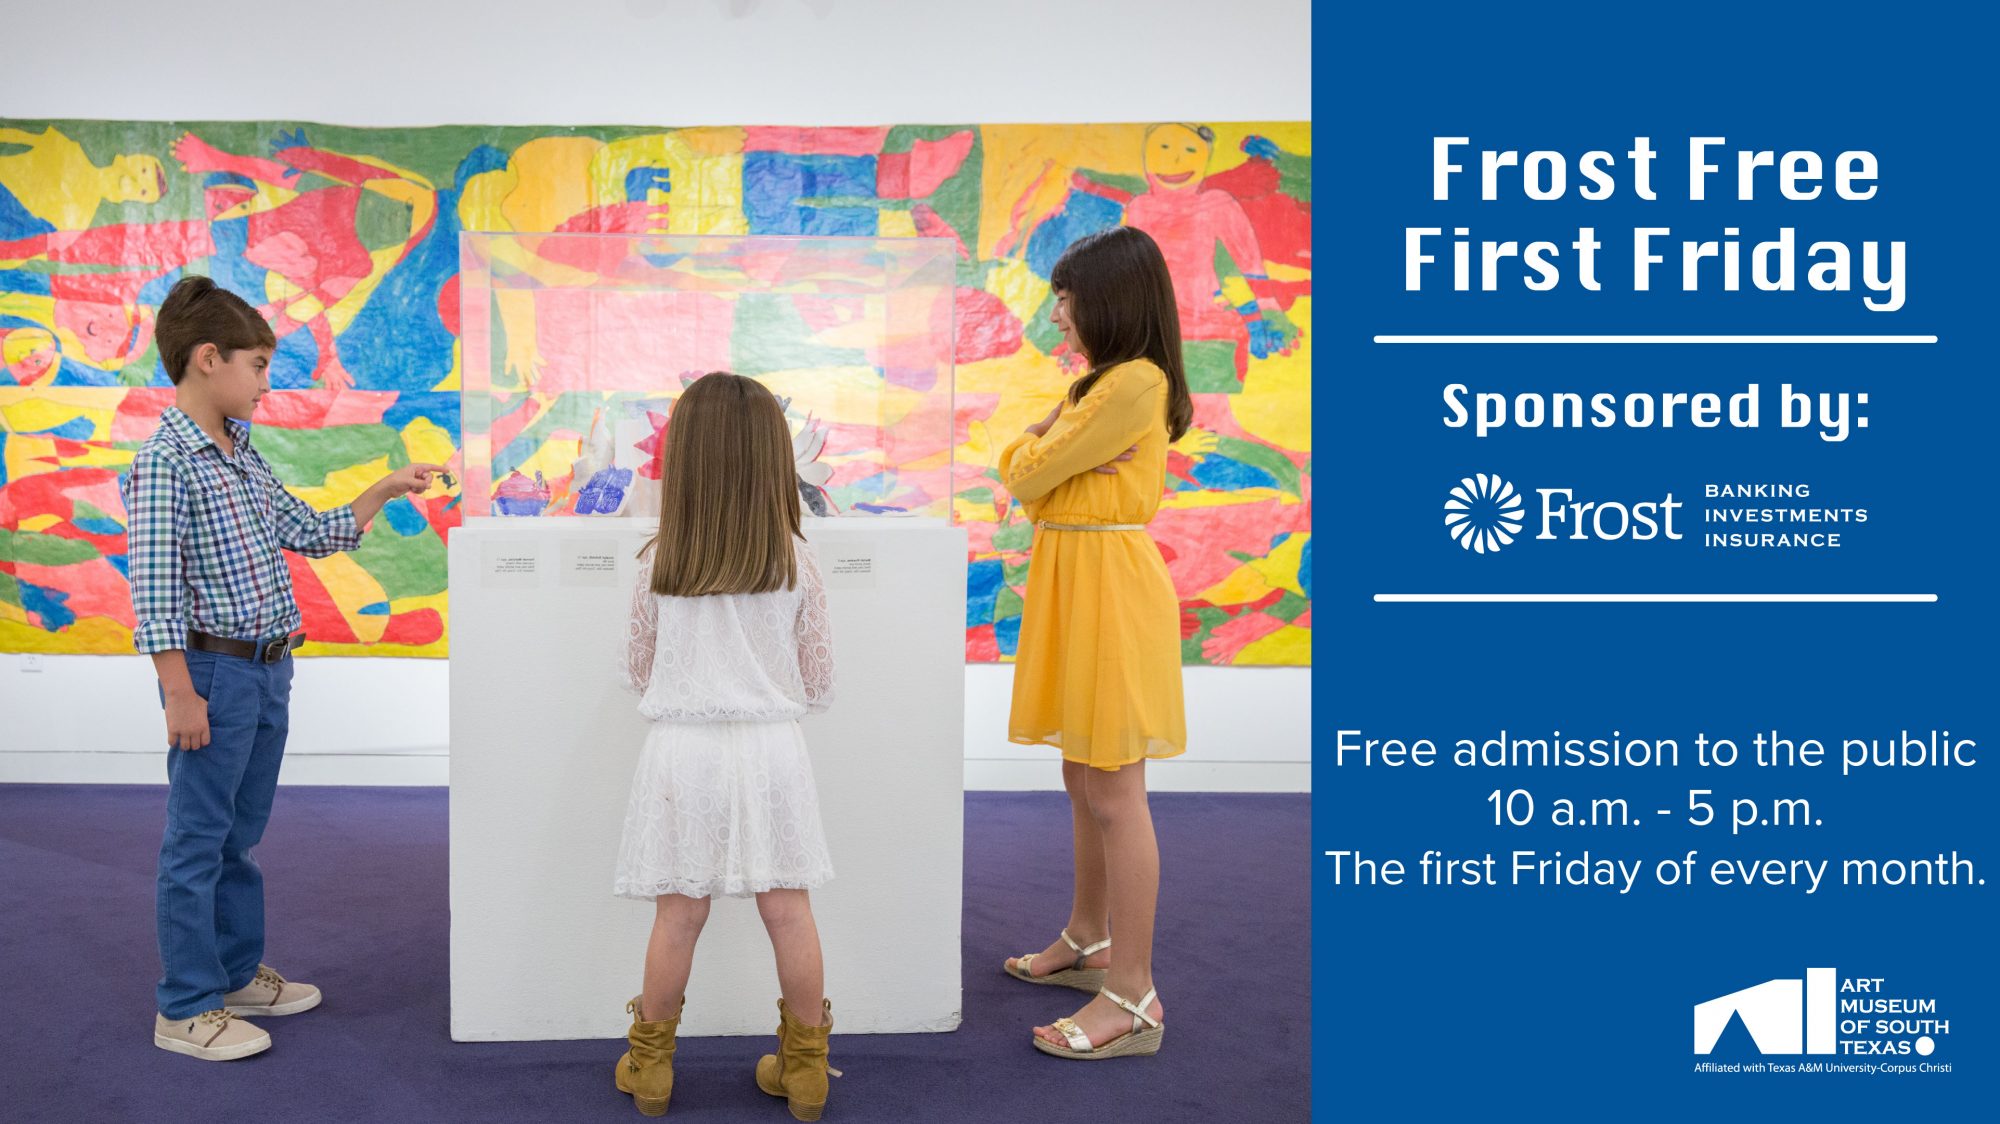 Free admission to the public 10 a.m.-5 p.m. the first Friday of every month courtesy of Frost Bank.